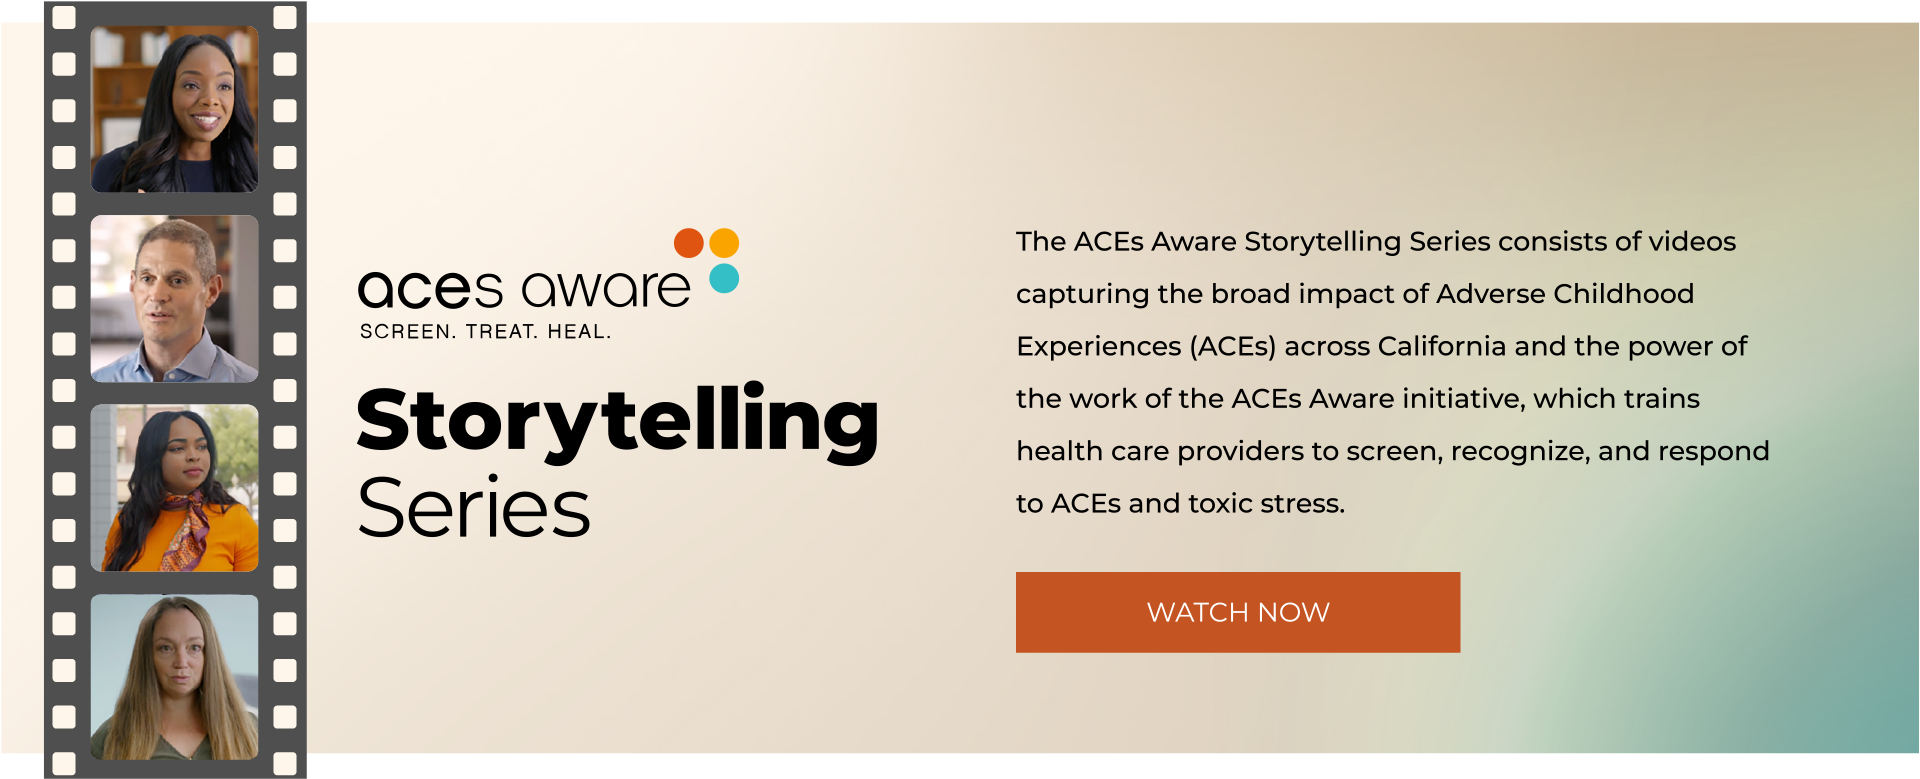 The ACEs Aware Storytelling Series consists of videos capturing the broad impact of Adverse Childhood Experiences (ACEs) across California and the power of the work of the ACEs Aware initiative, which trains health care providers to screen, recognize, and respond to ACEs and toxic stress. Watch now.